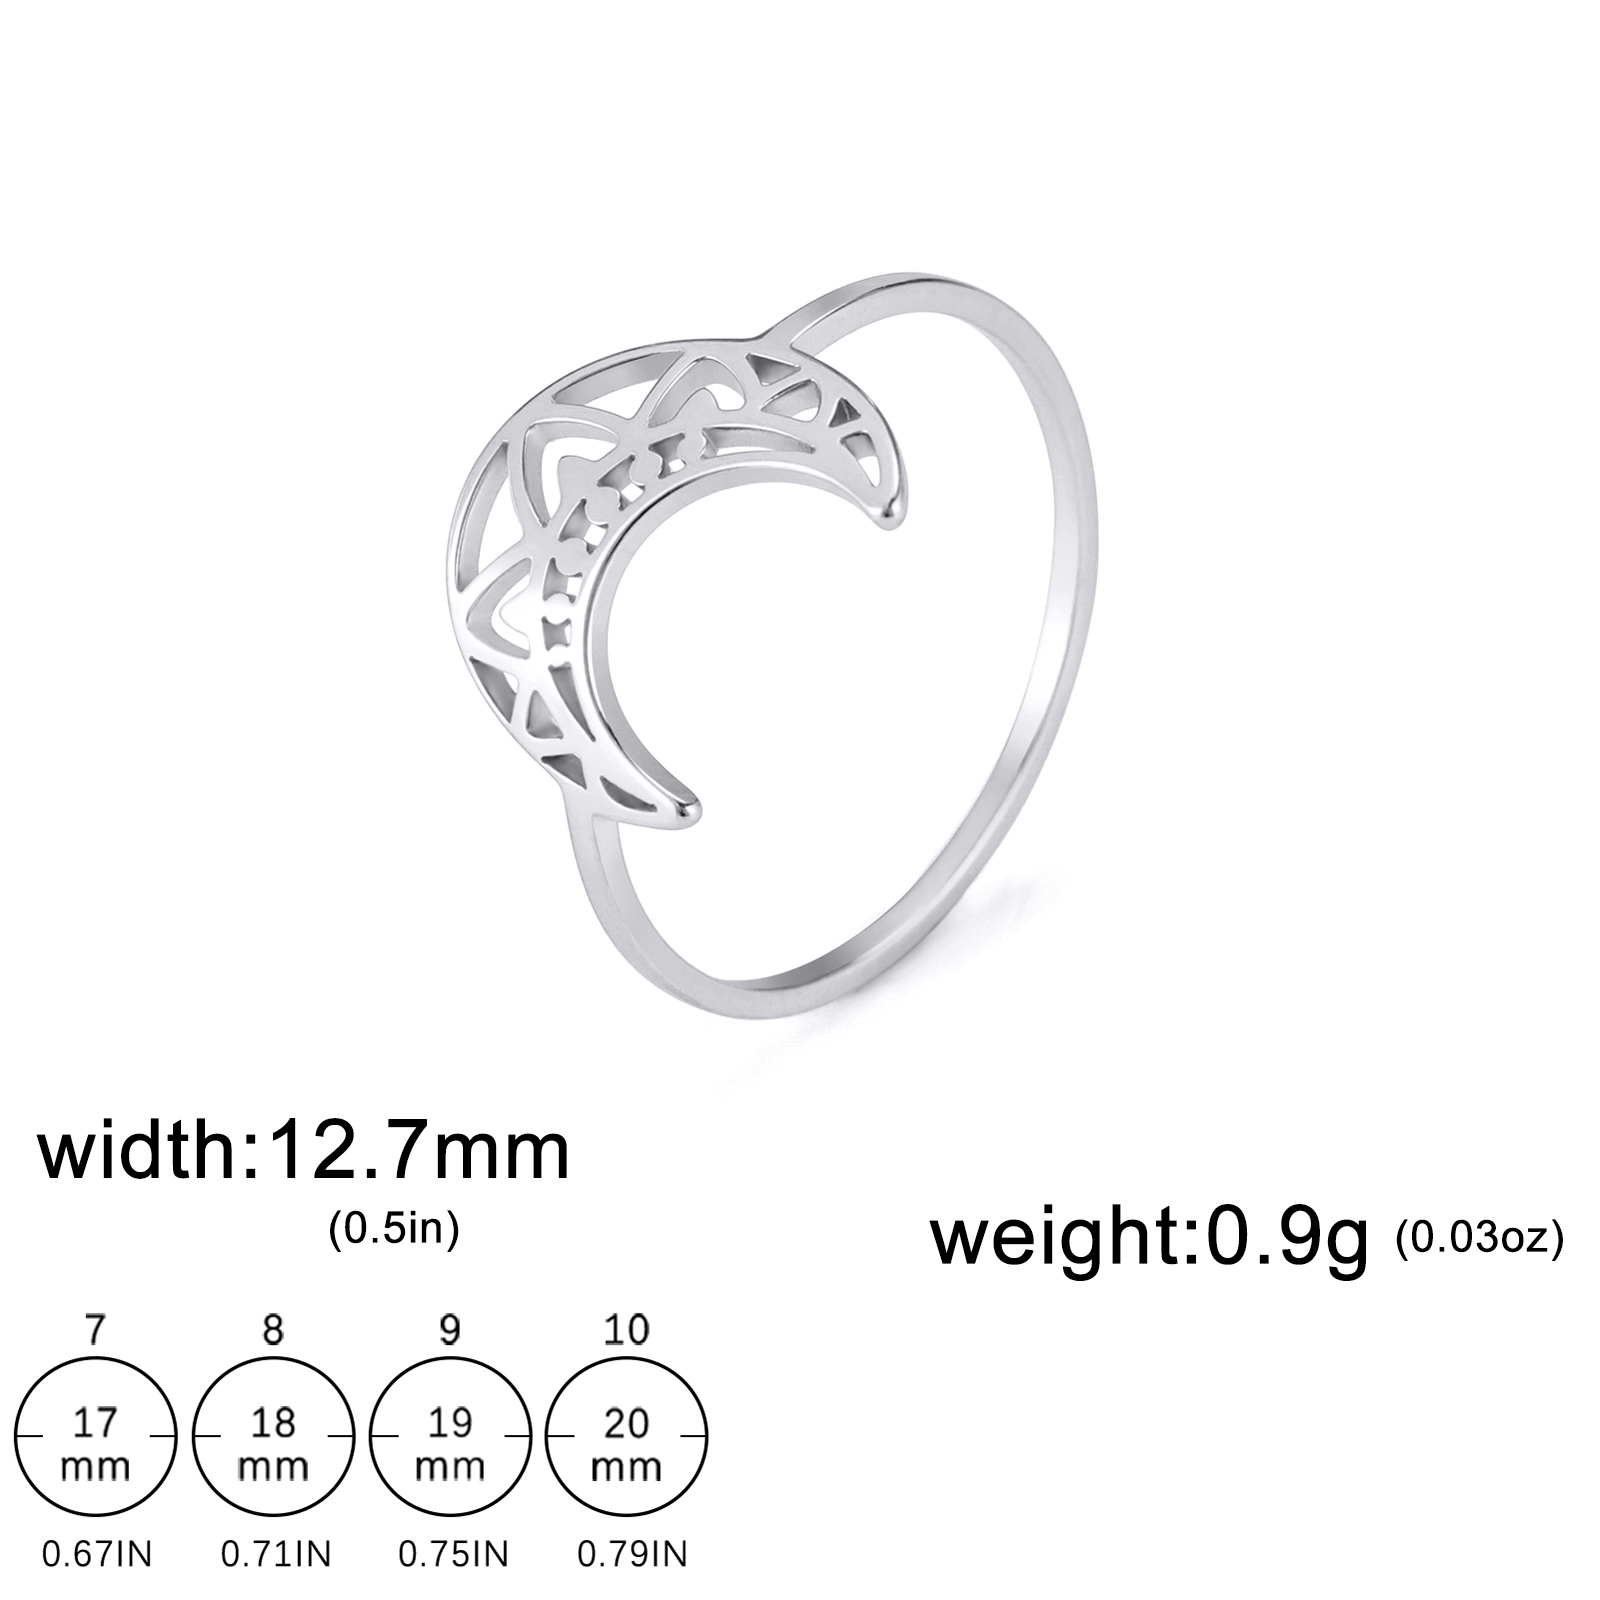 Crescent Moon and Star Ring, 9